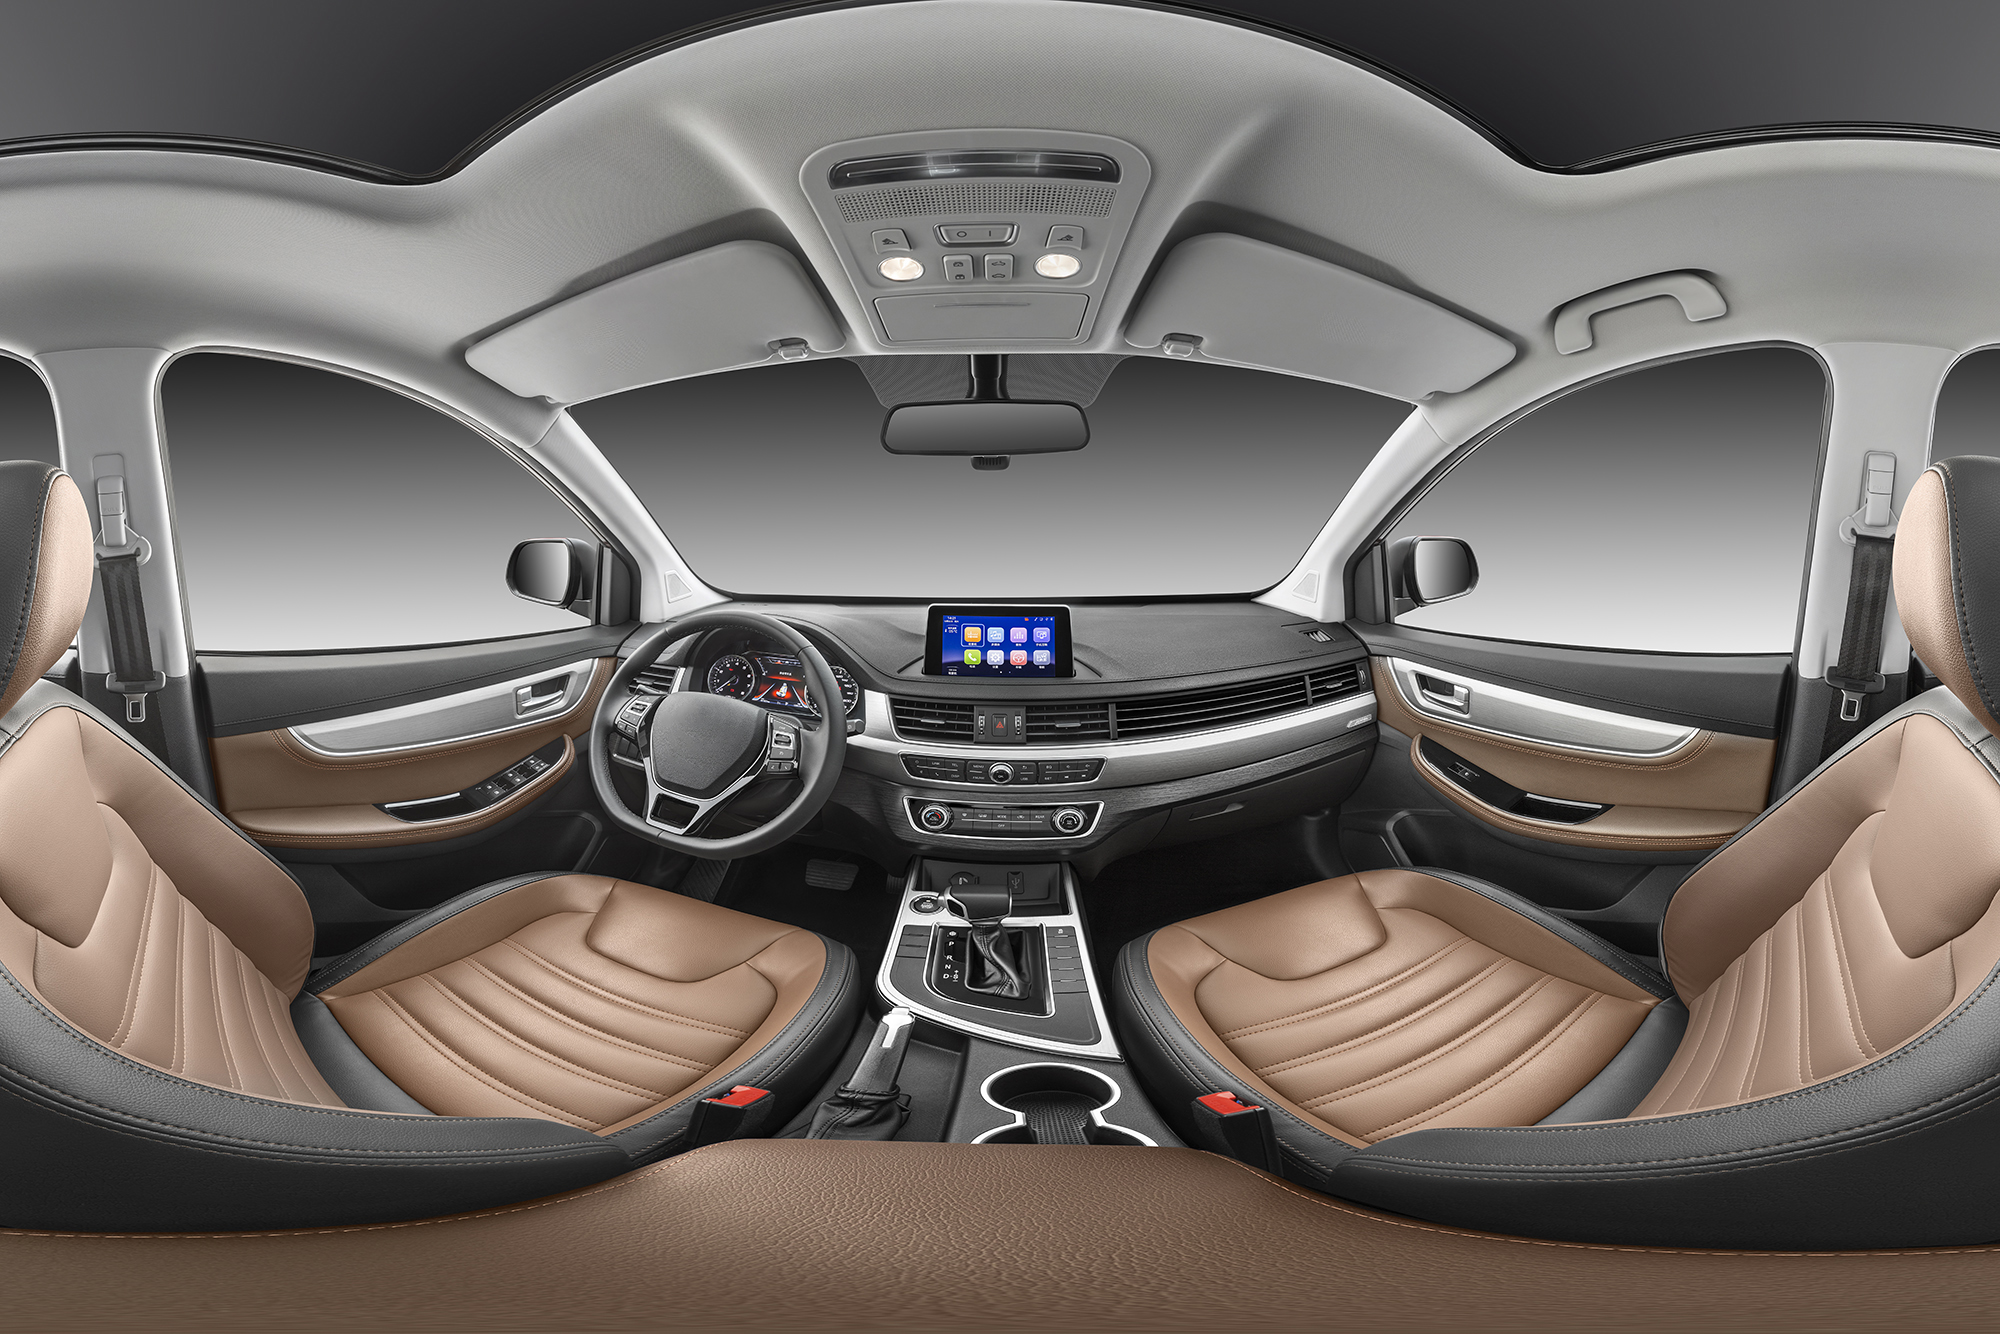 How to improve the scratch resistance of Automotive interiors？